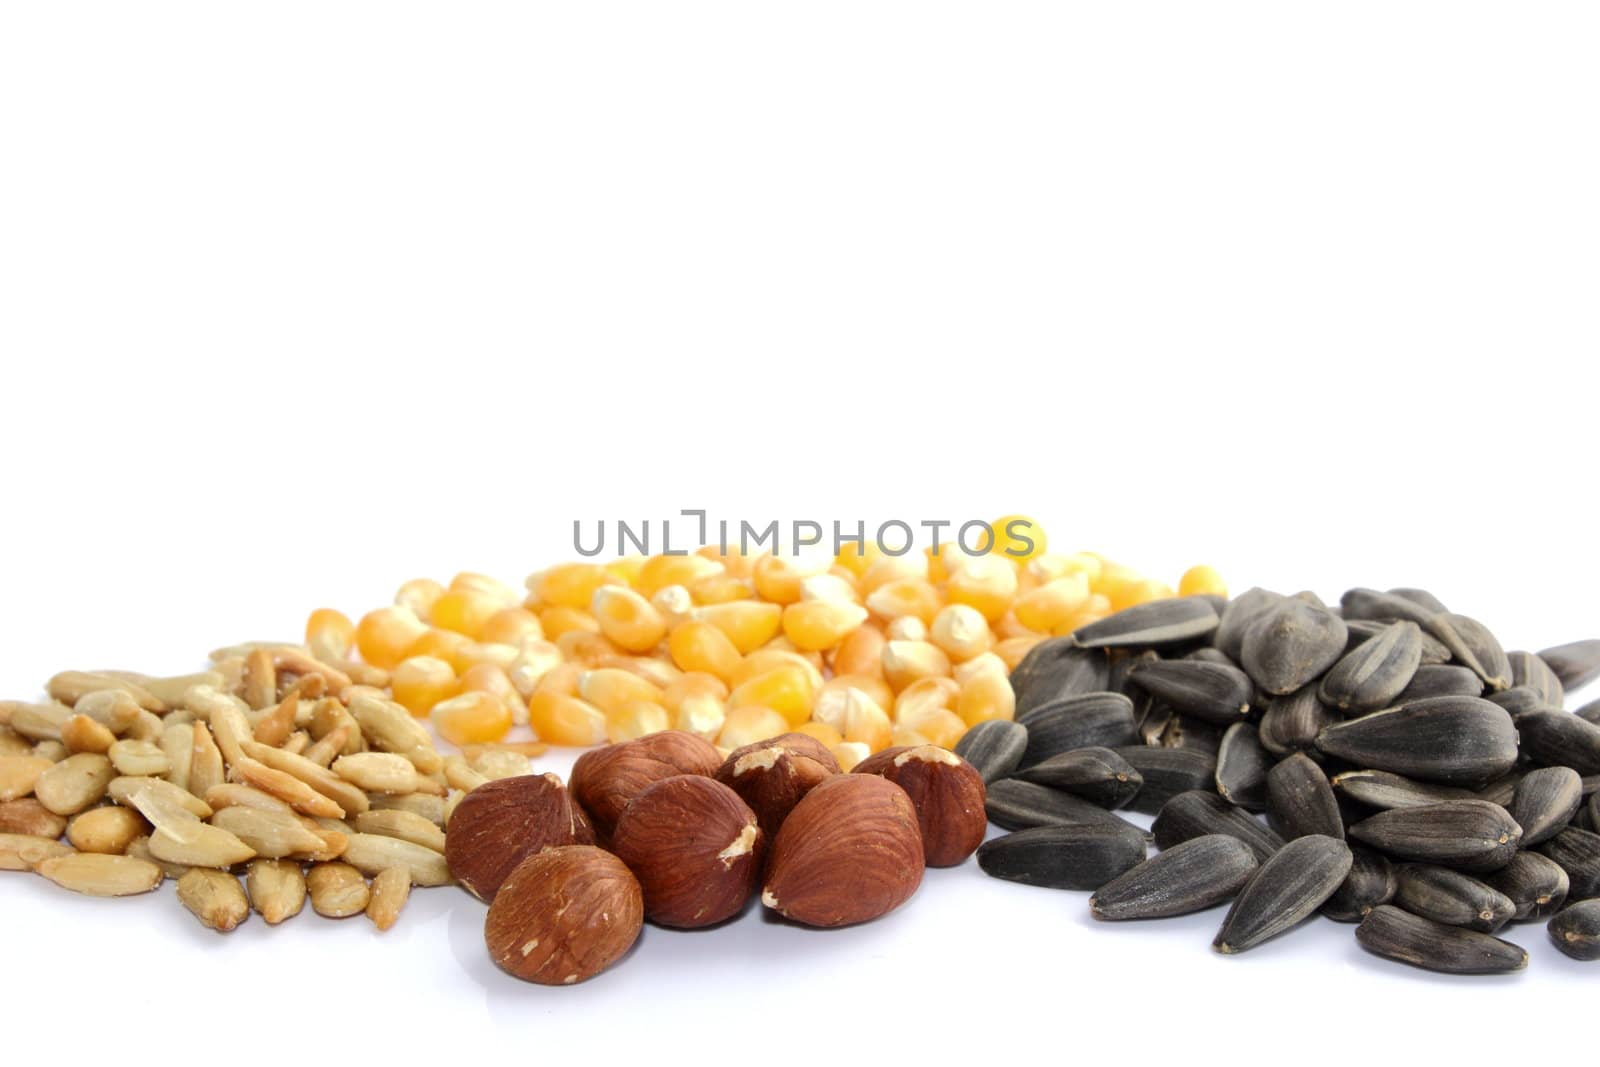 sunflower seeds, hazelnuts and some popcorn ingredients